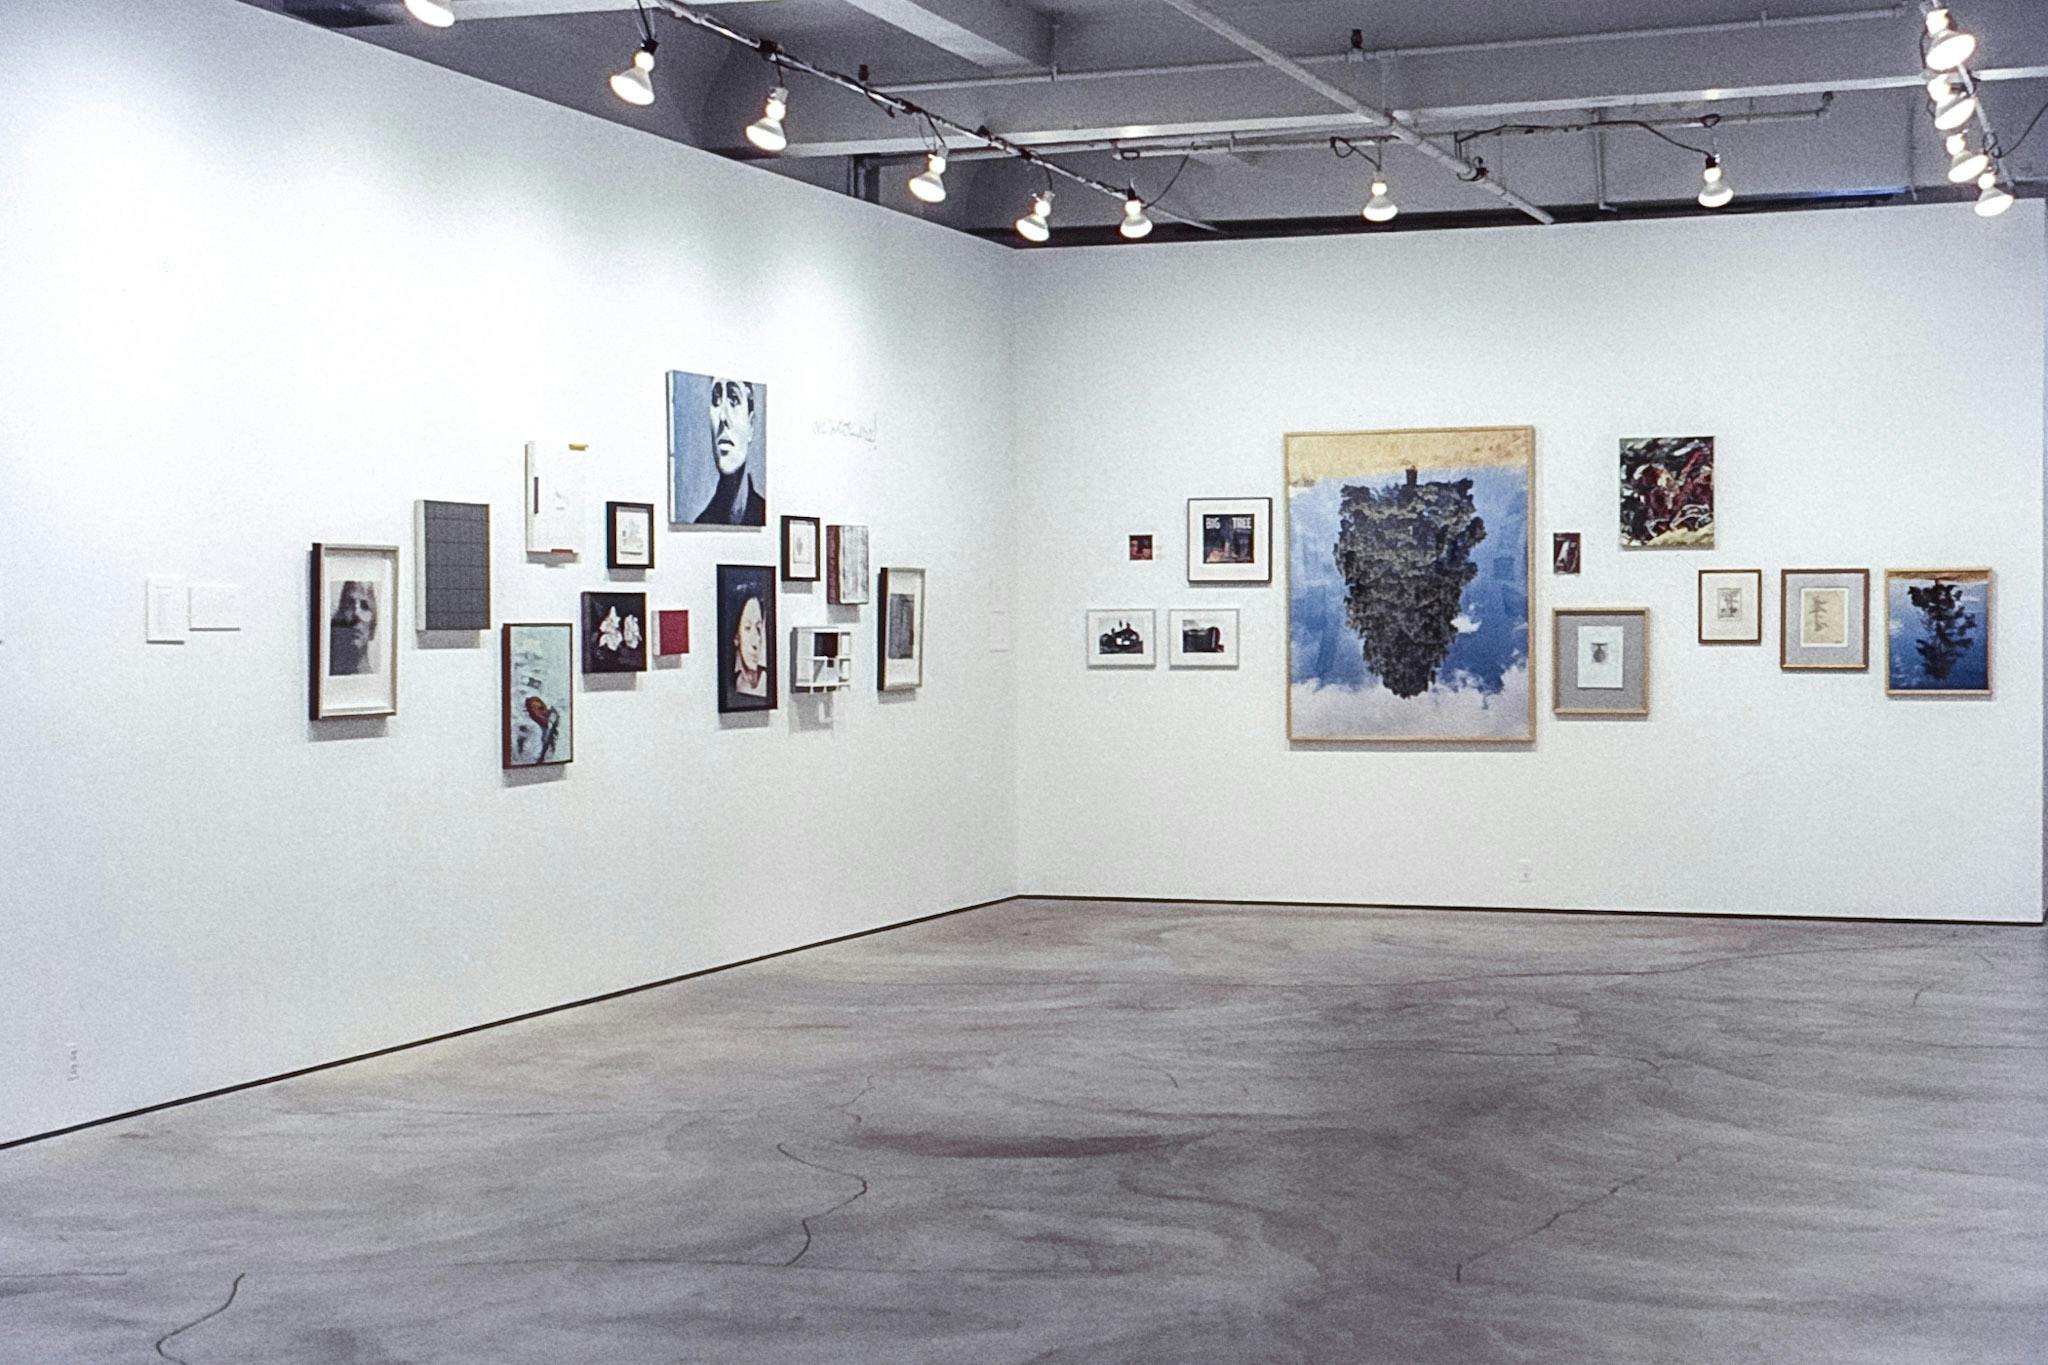 A corner of a gallery space with several artworks mounted across both walls. The works vary in size, framed and unframed. On the right, there is a large photo of a tree with a blue sky, upside down.